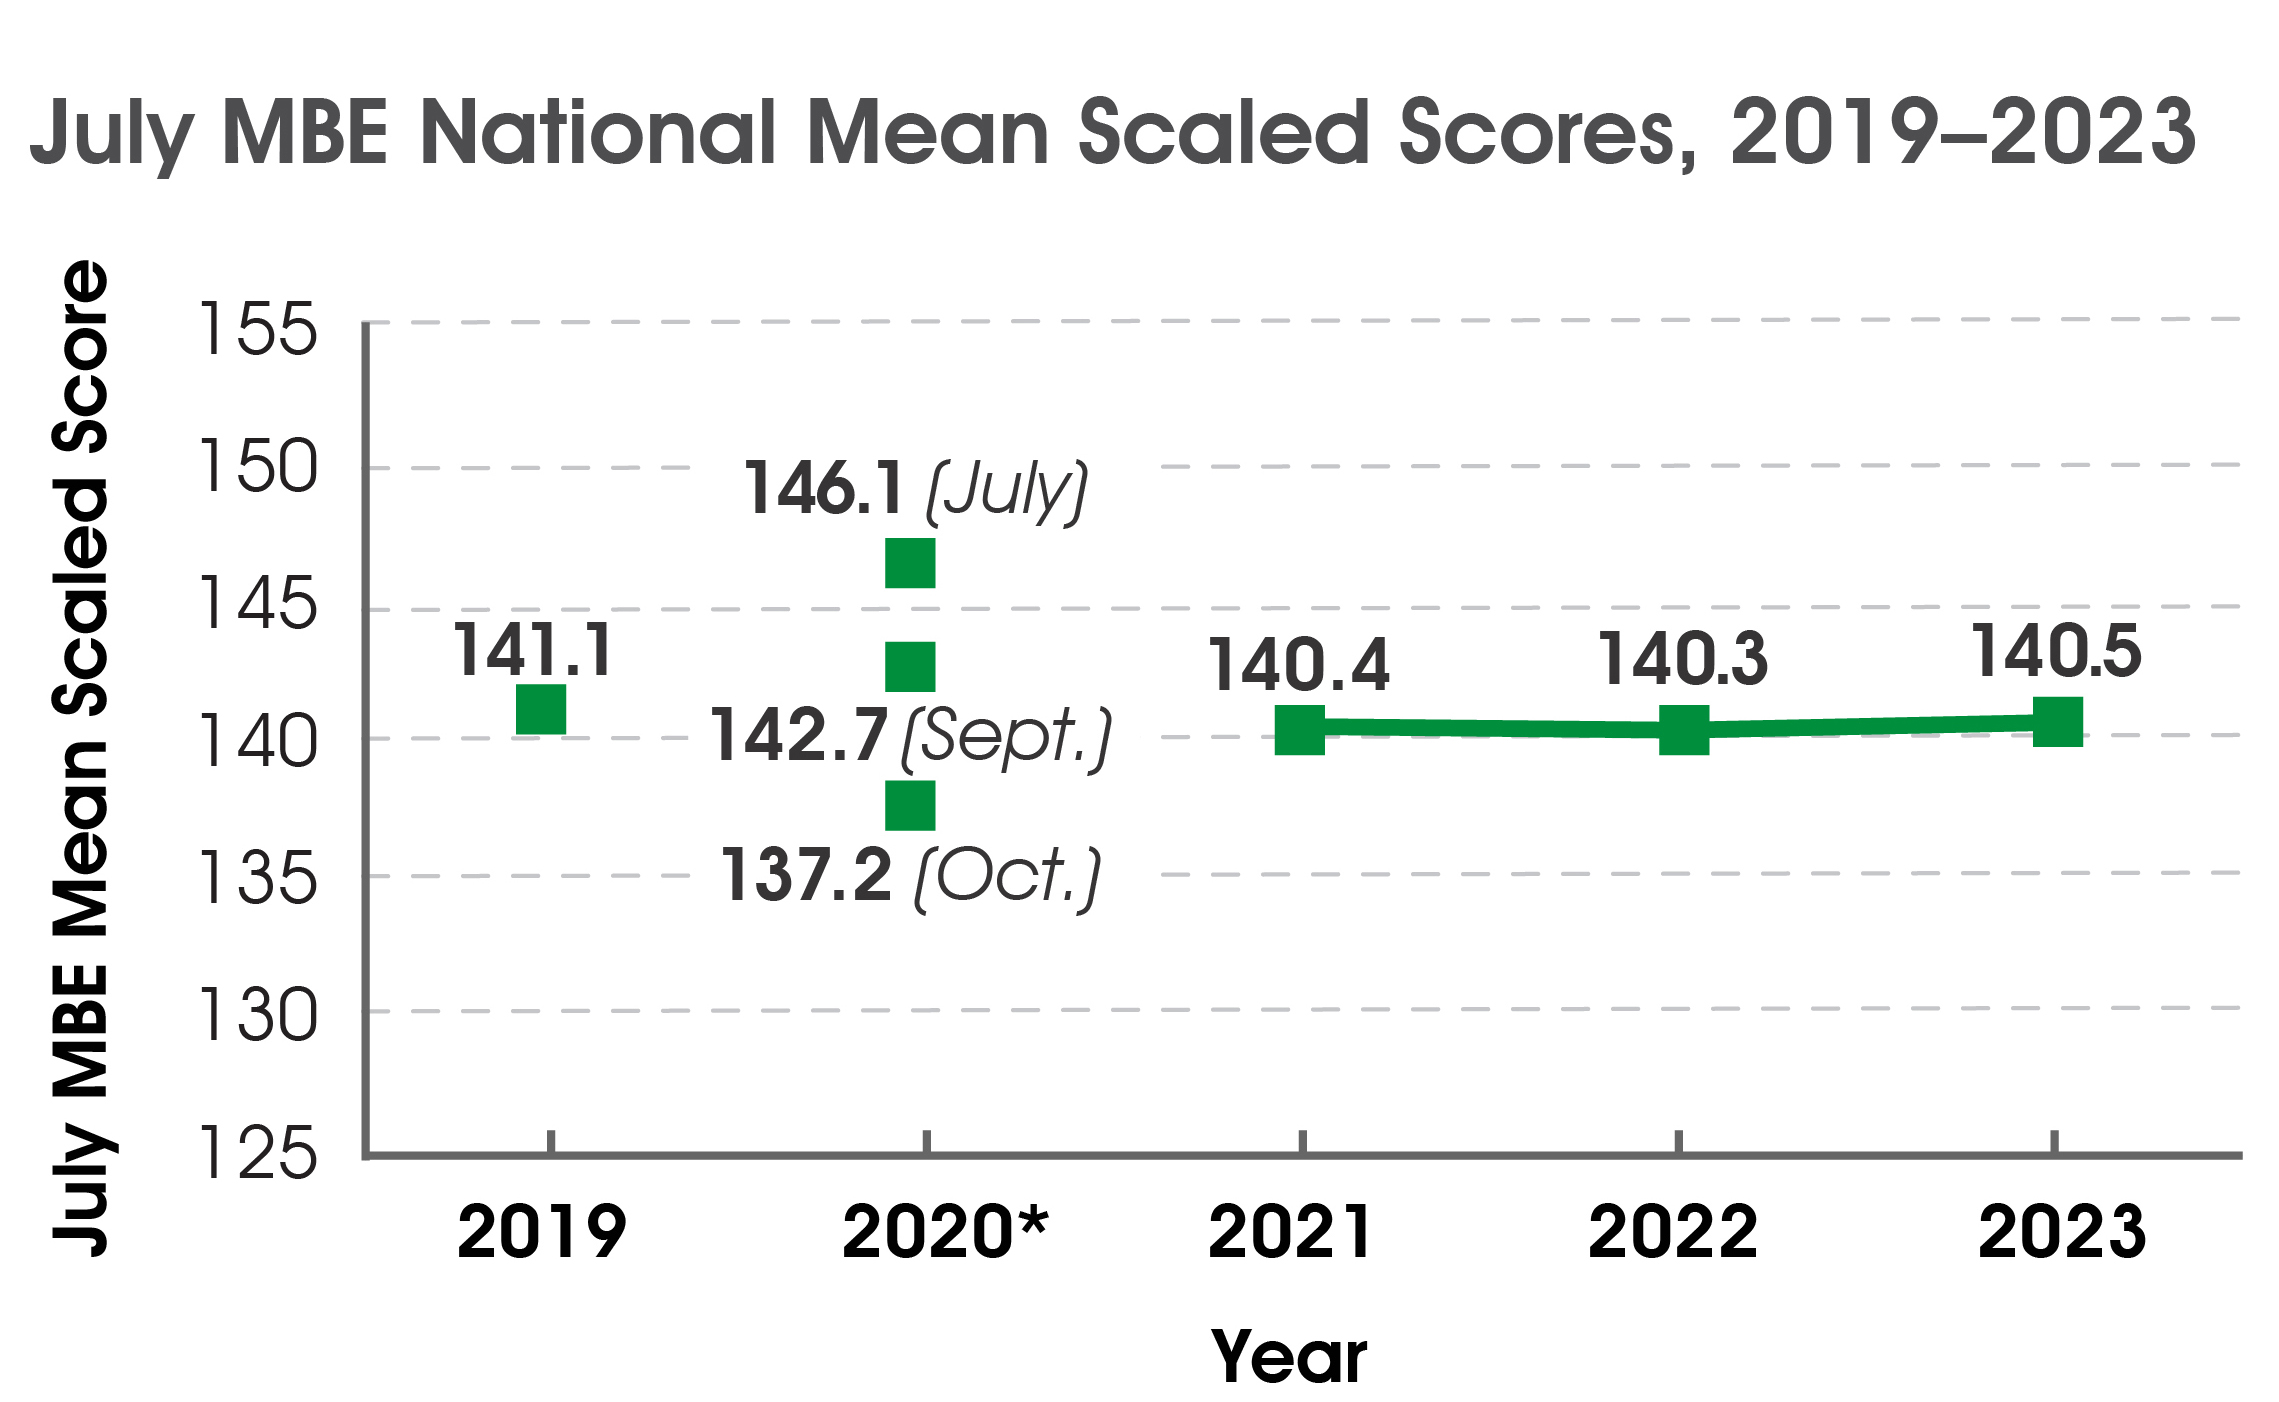 Line graph of 2019-2023 July MBE national mean scaled scores. 2019 = 141.1; 2020 = 146.1 (July), 142.7 (Sept.), 137.2 (Oct.); 2021 = 140.4; 2022 = 140.3; 2023 = 140.5.